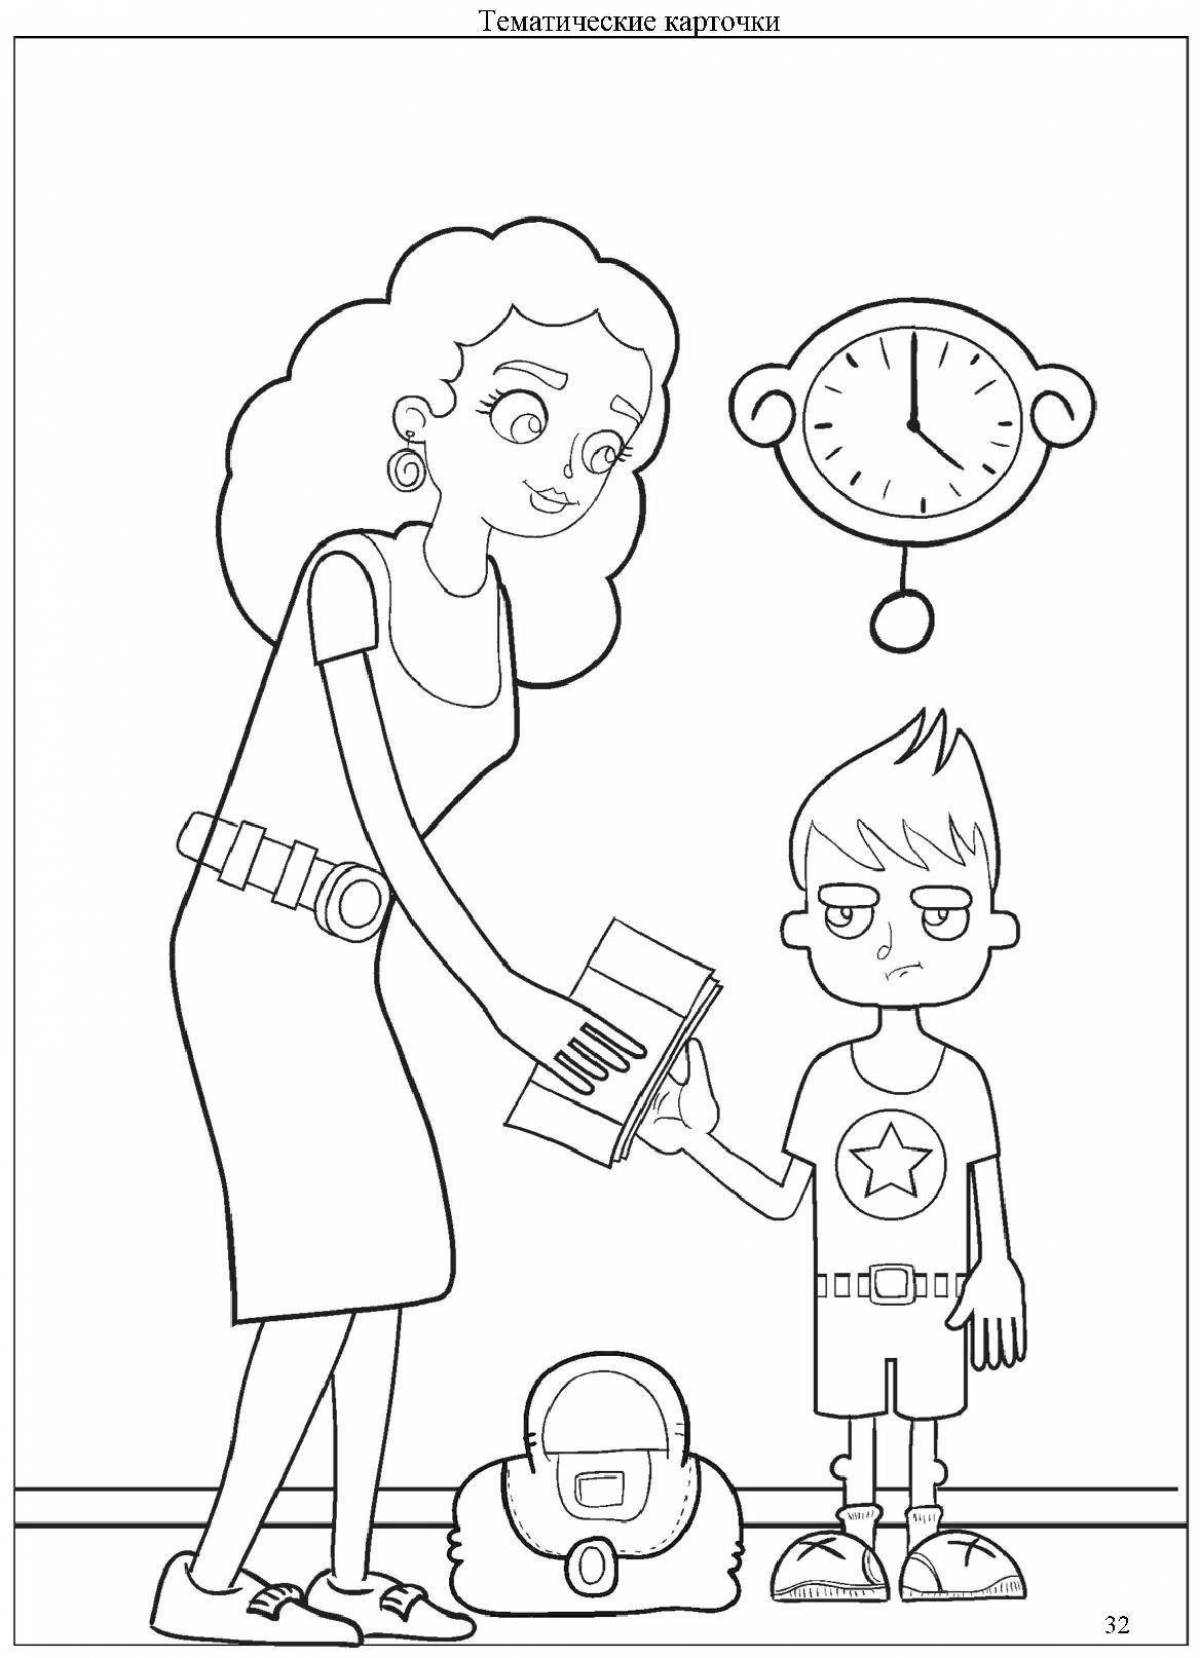 Financial literacy coloring book for preschoolers